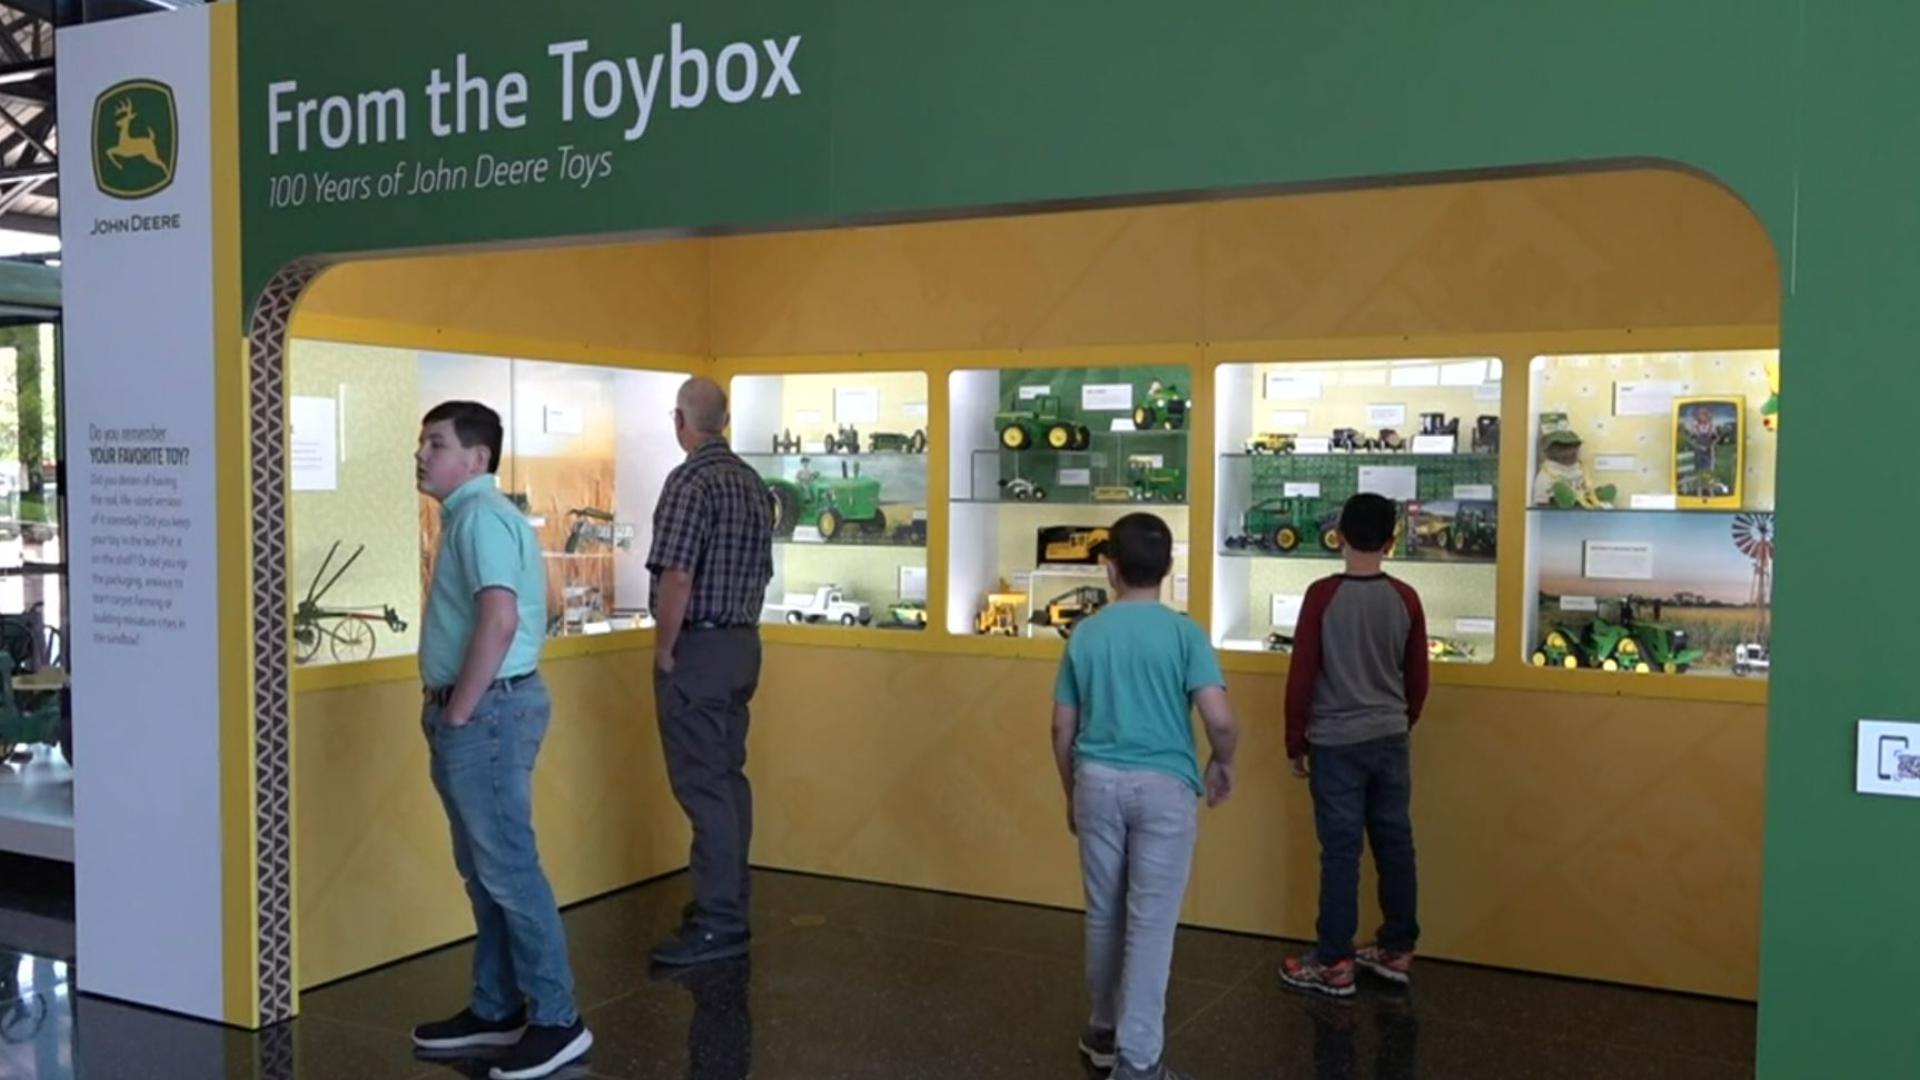 The new, permanent exhibit is the first time some of the toys have been put on display for the public.